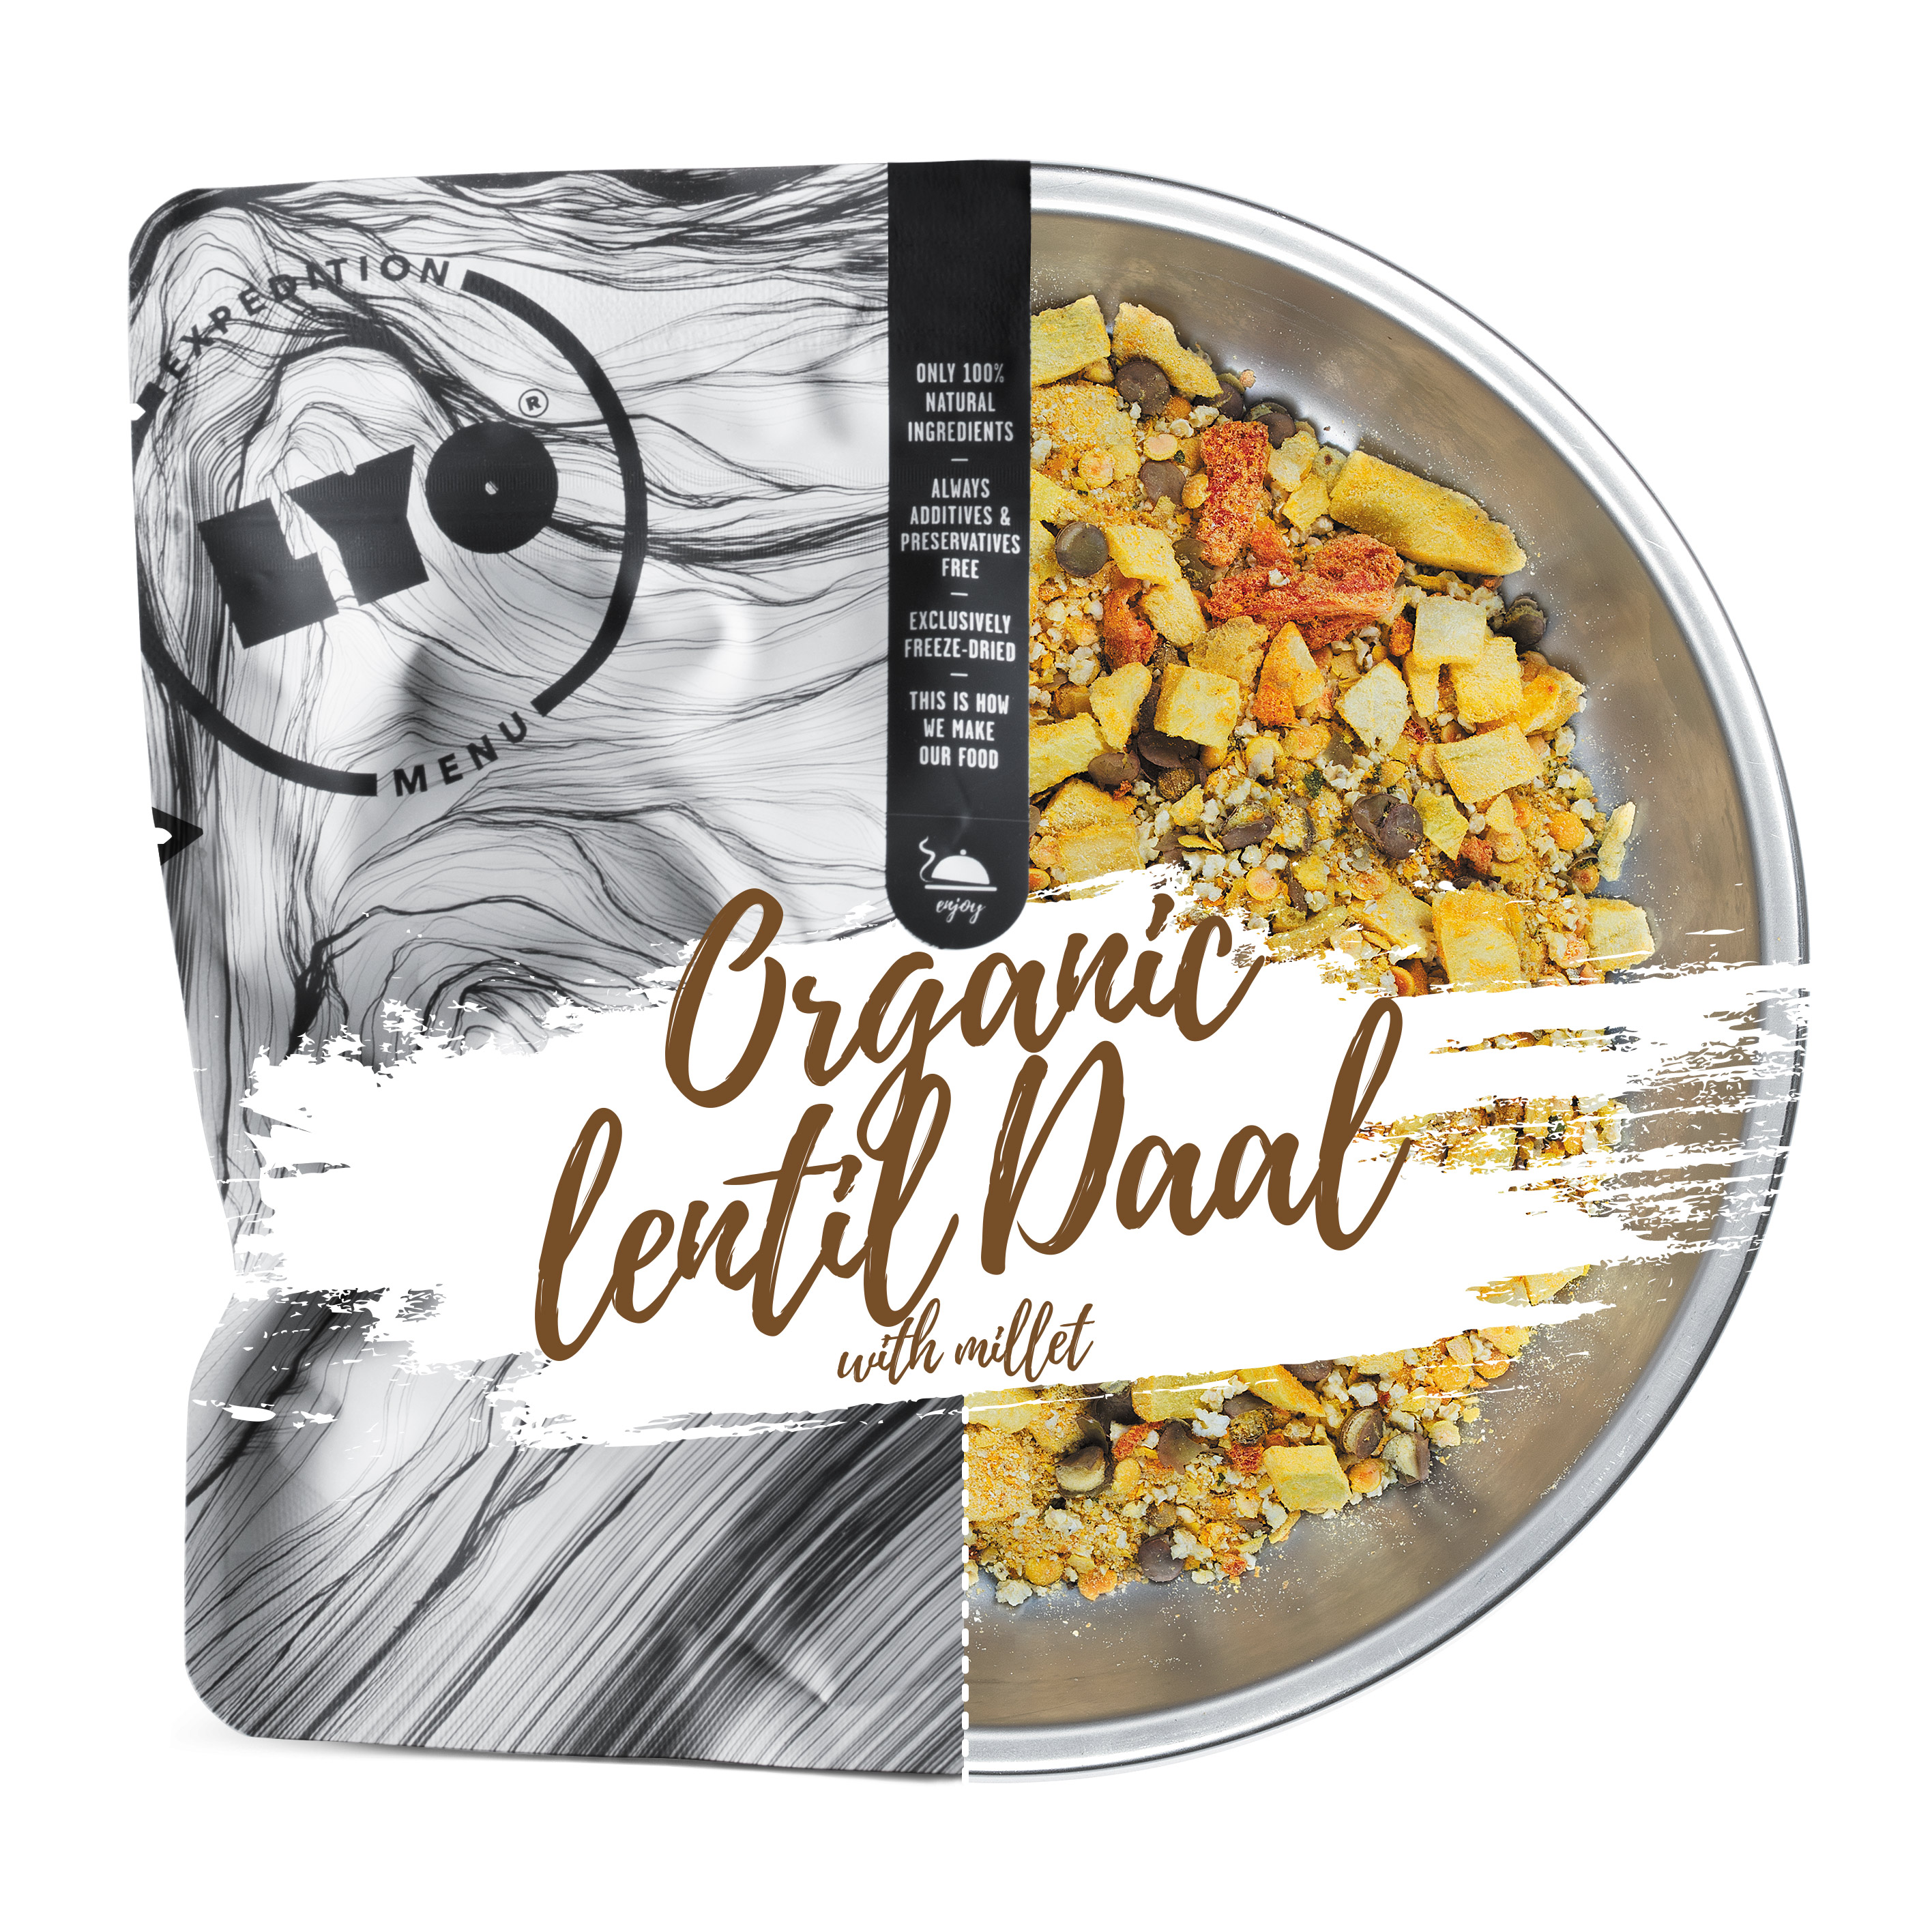 Organic Lentil Daal With Millet 370g Onecolour